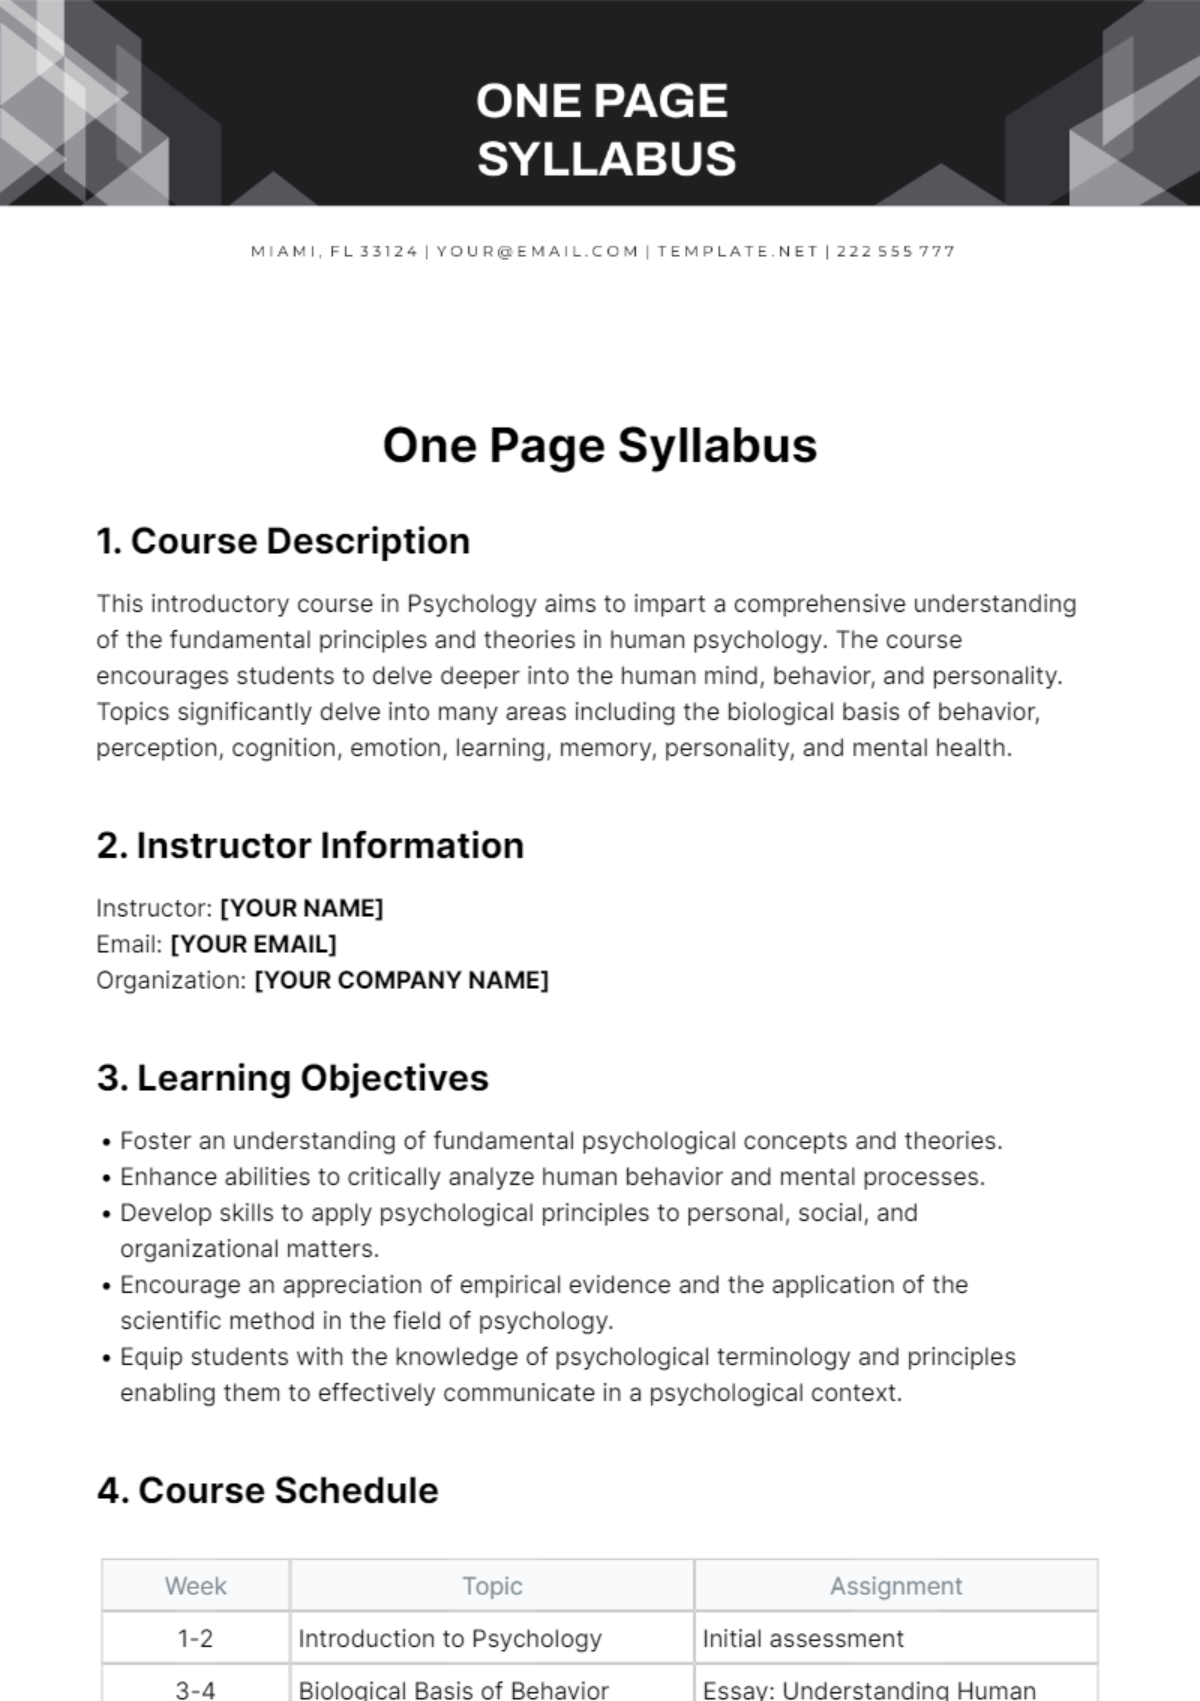 One Page Syllabus Template